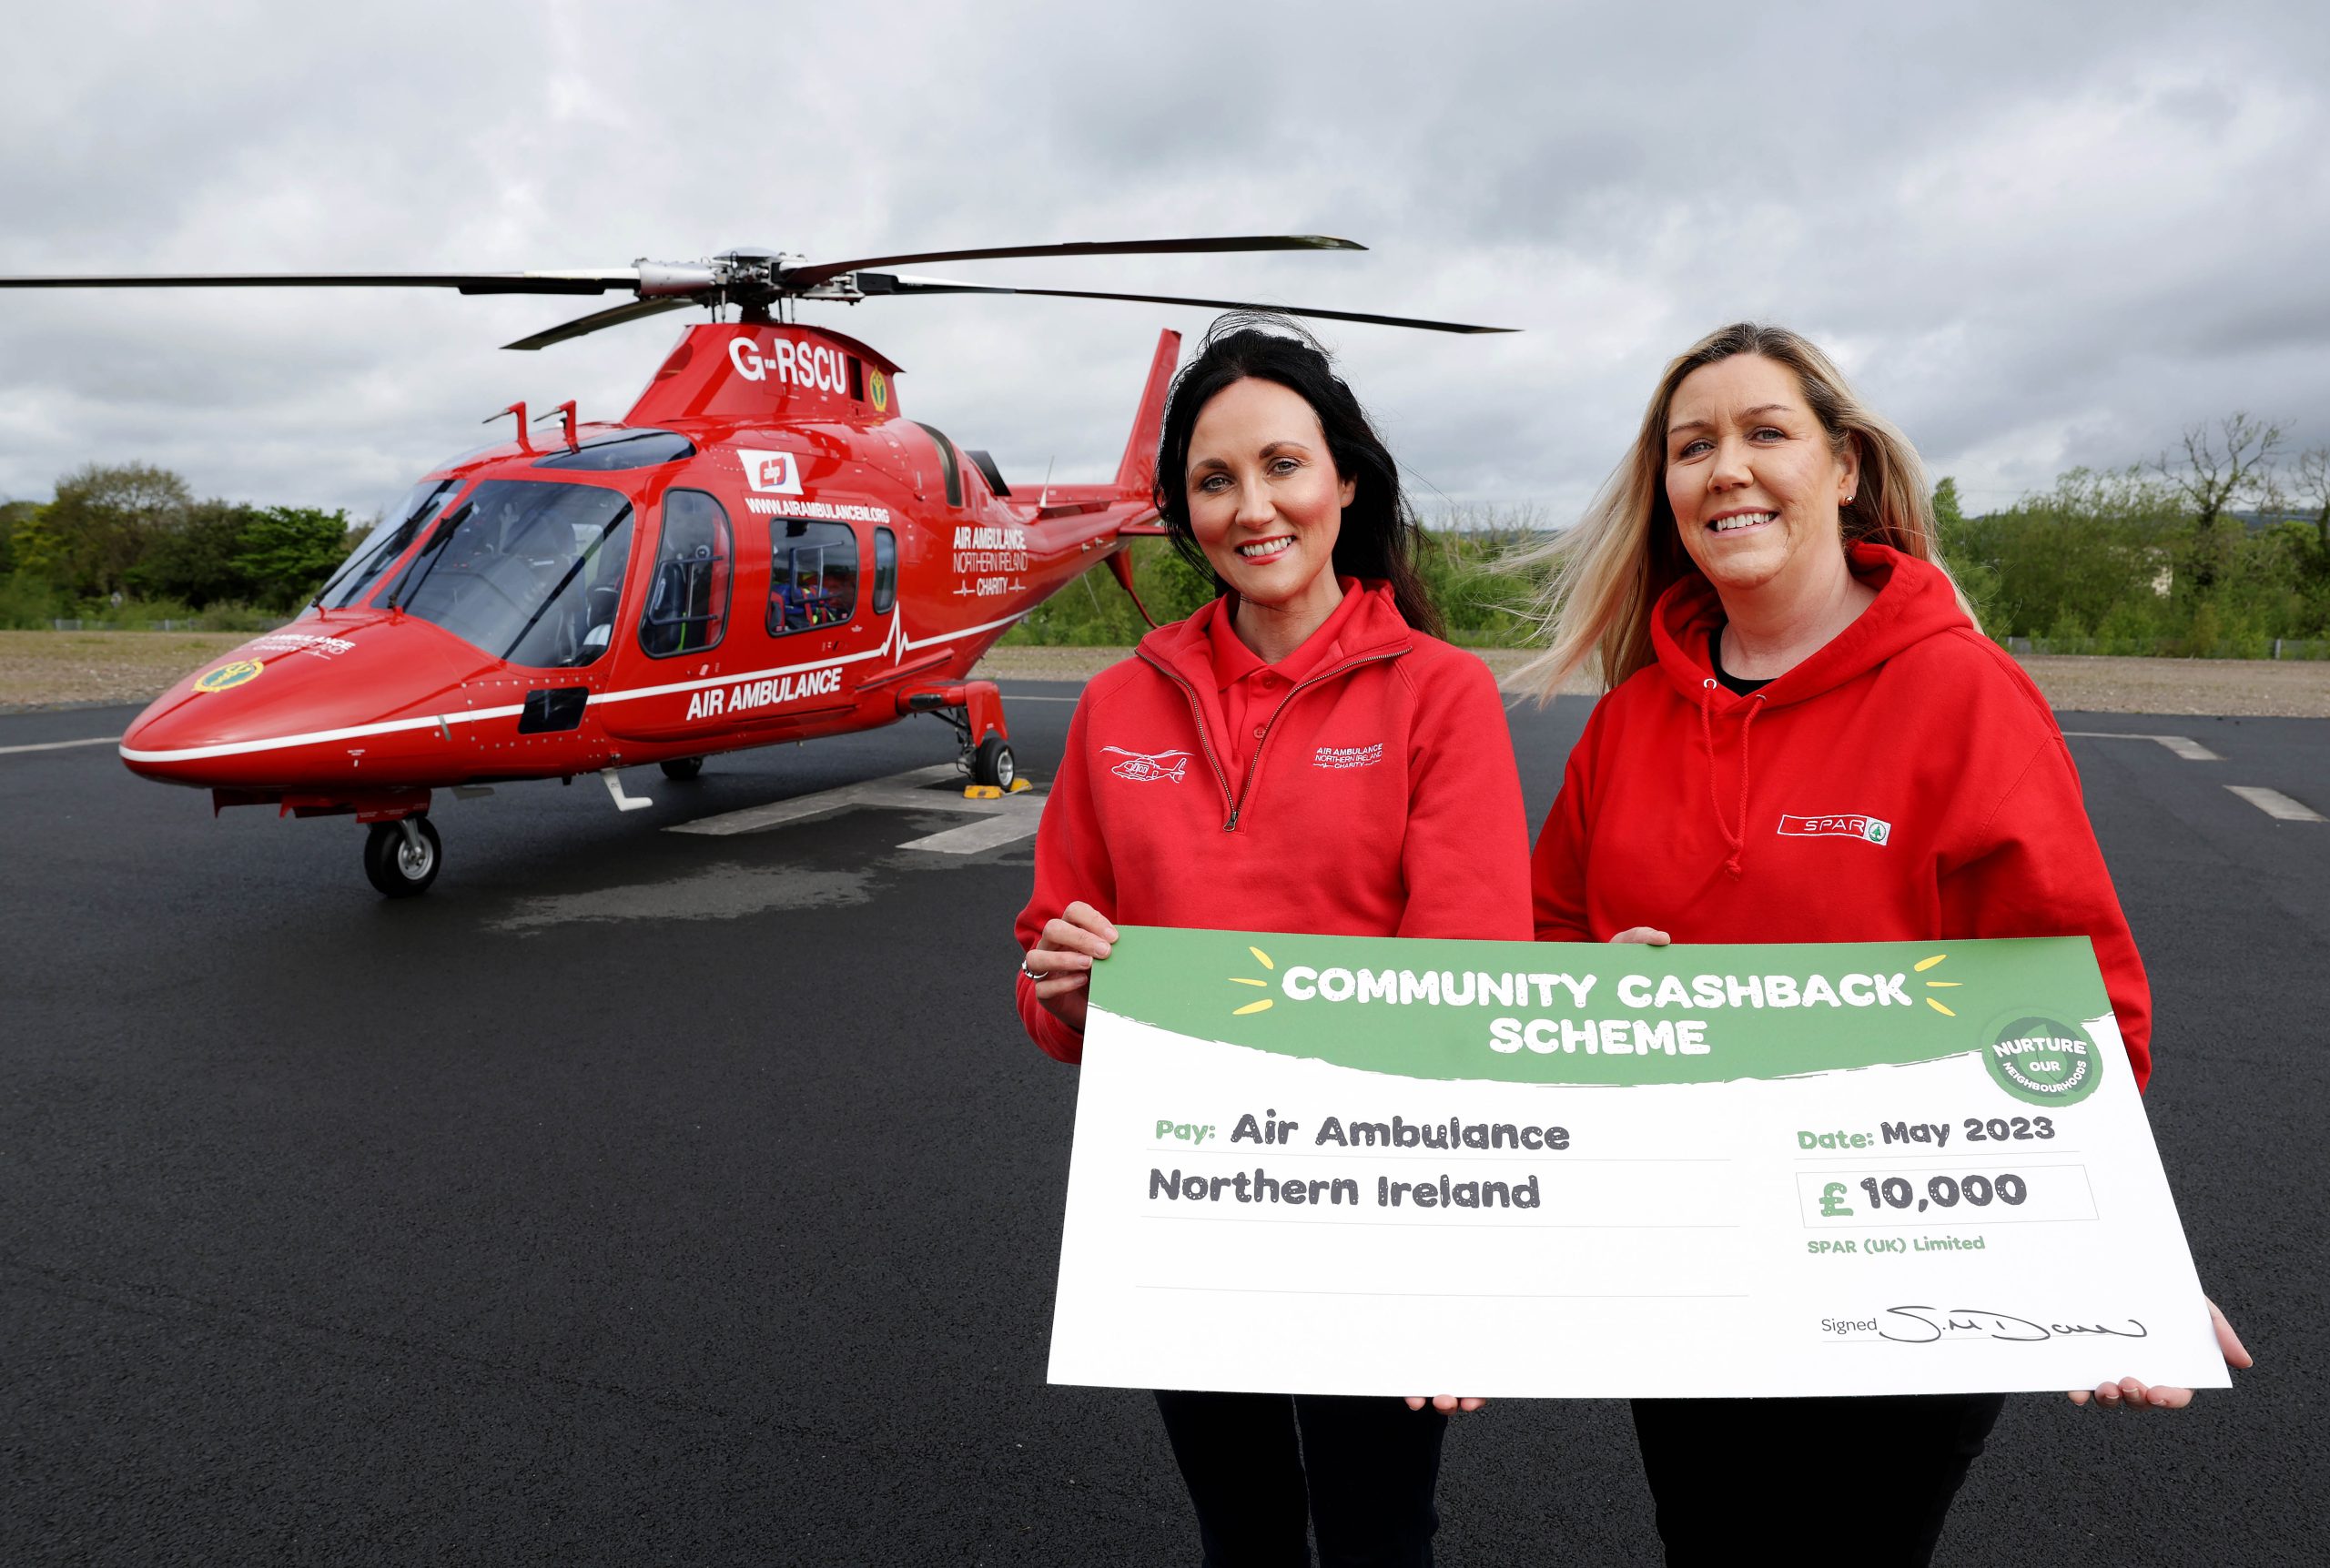 New funding will enable Air Ambulance NI to provide additional critical response this year